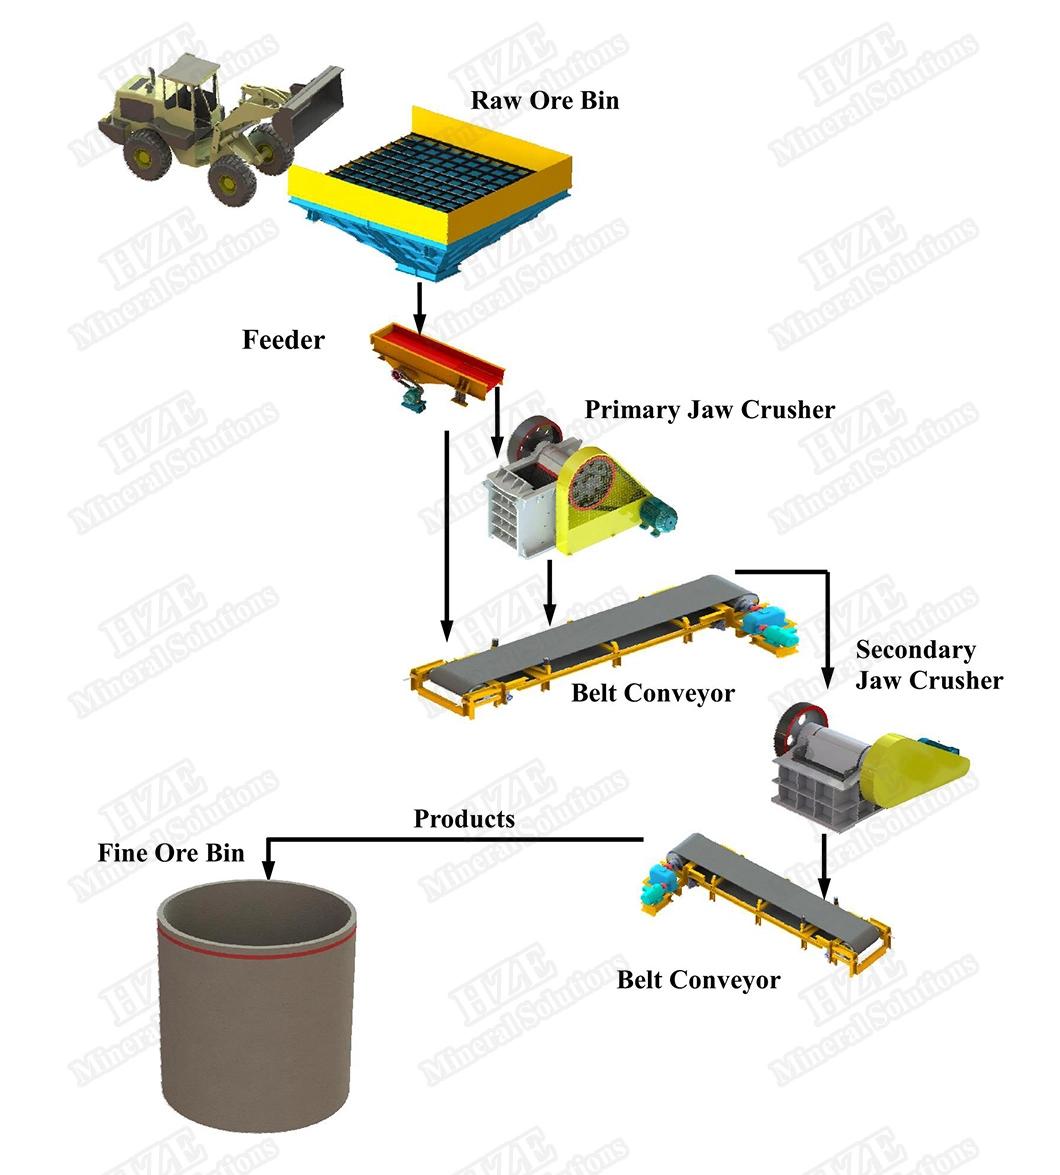 Mineral Processing Mining Ore Crushing Circuit and Equipment